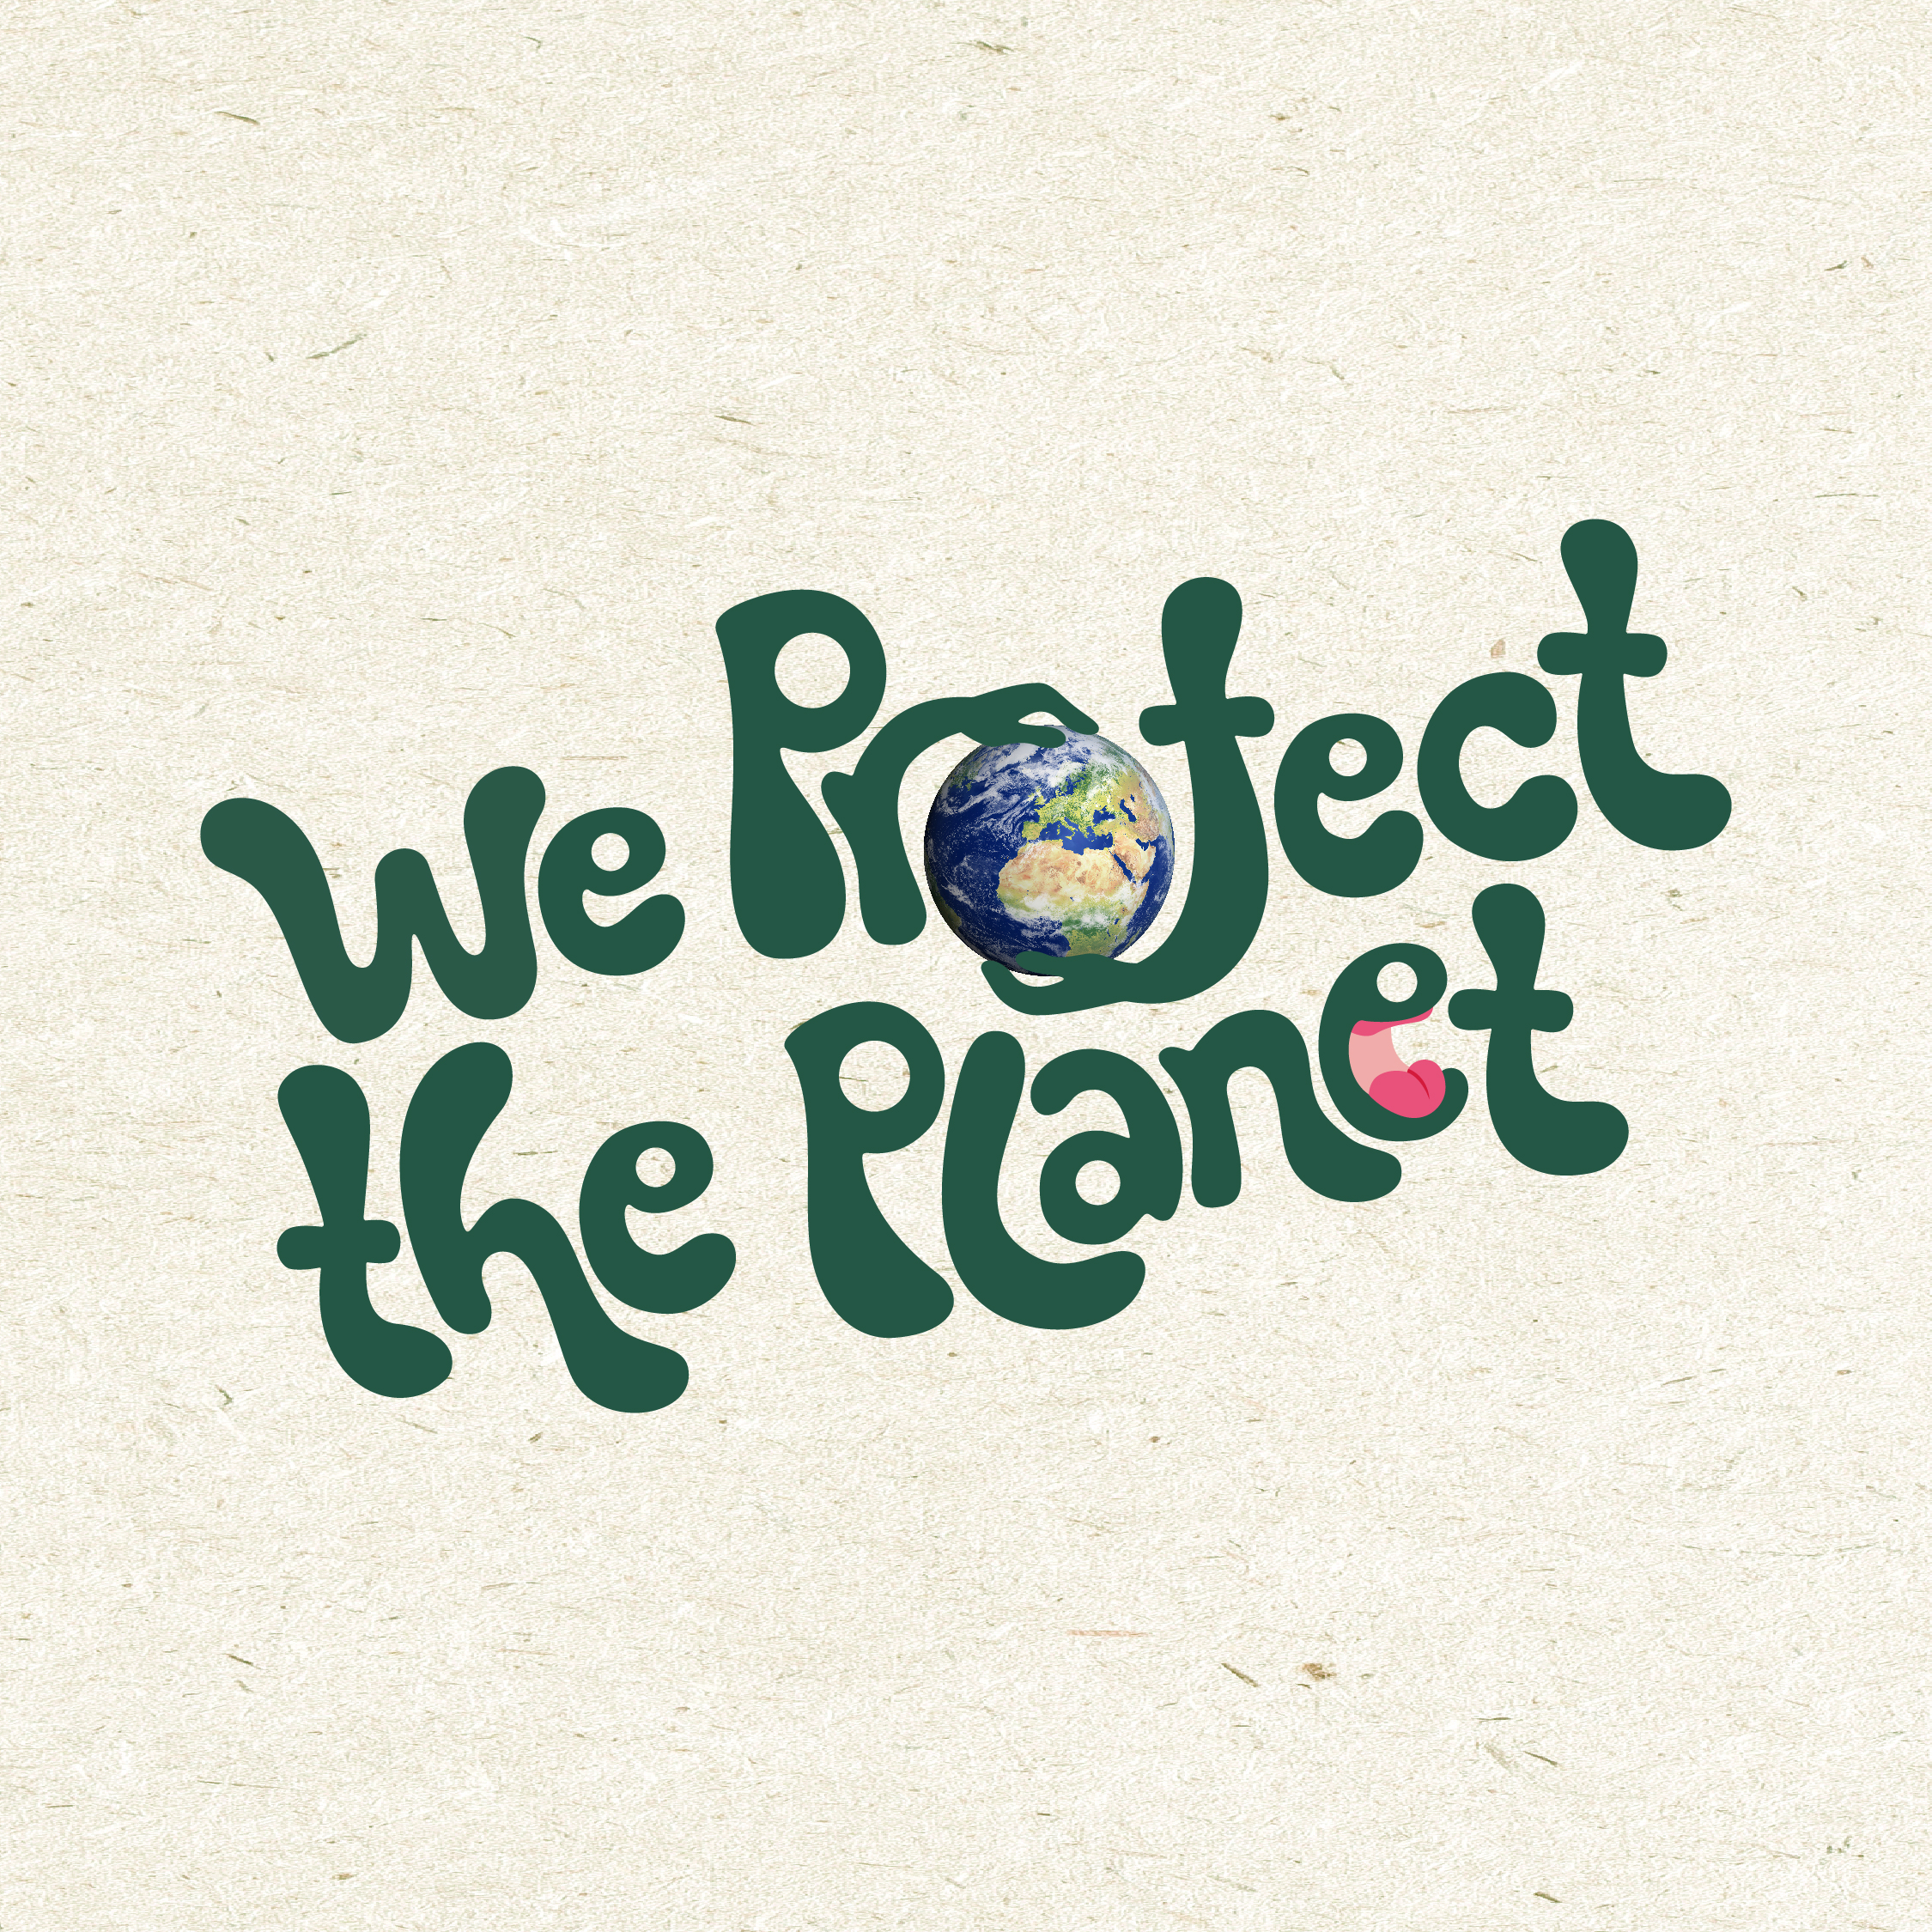 We protect the planet text with two hands holding a globe. Text is dark green and a beige textured background